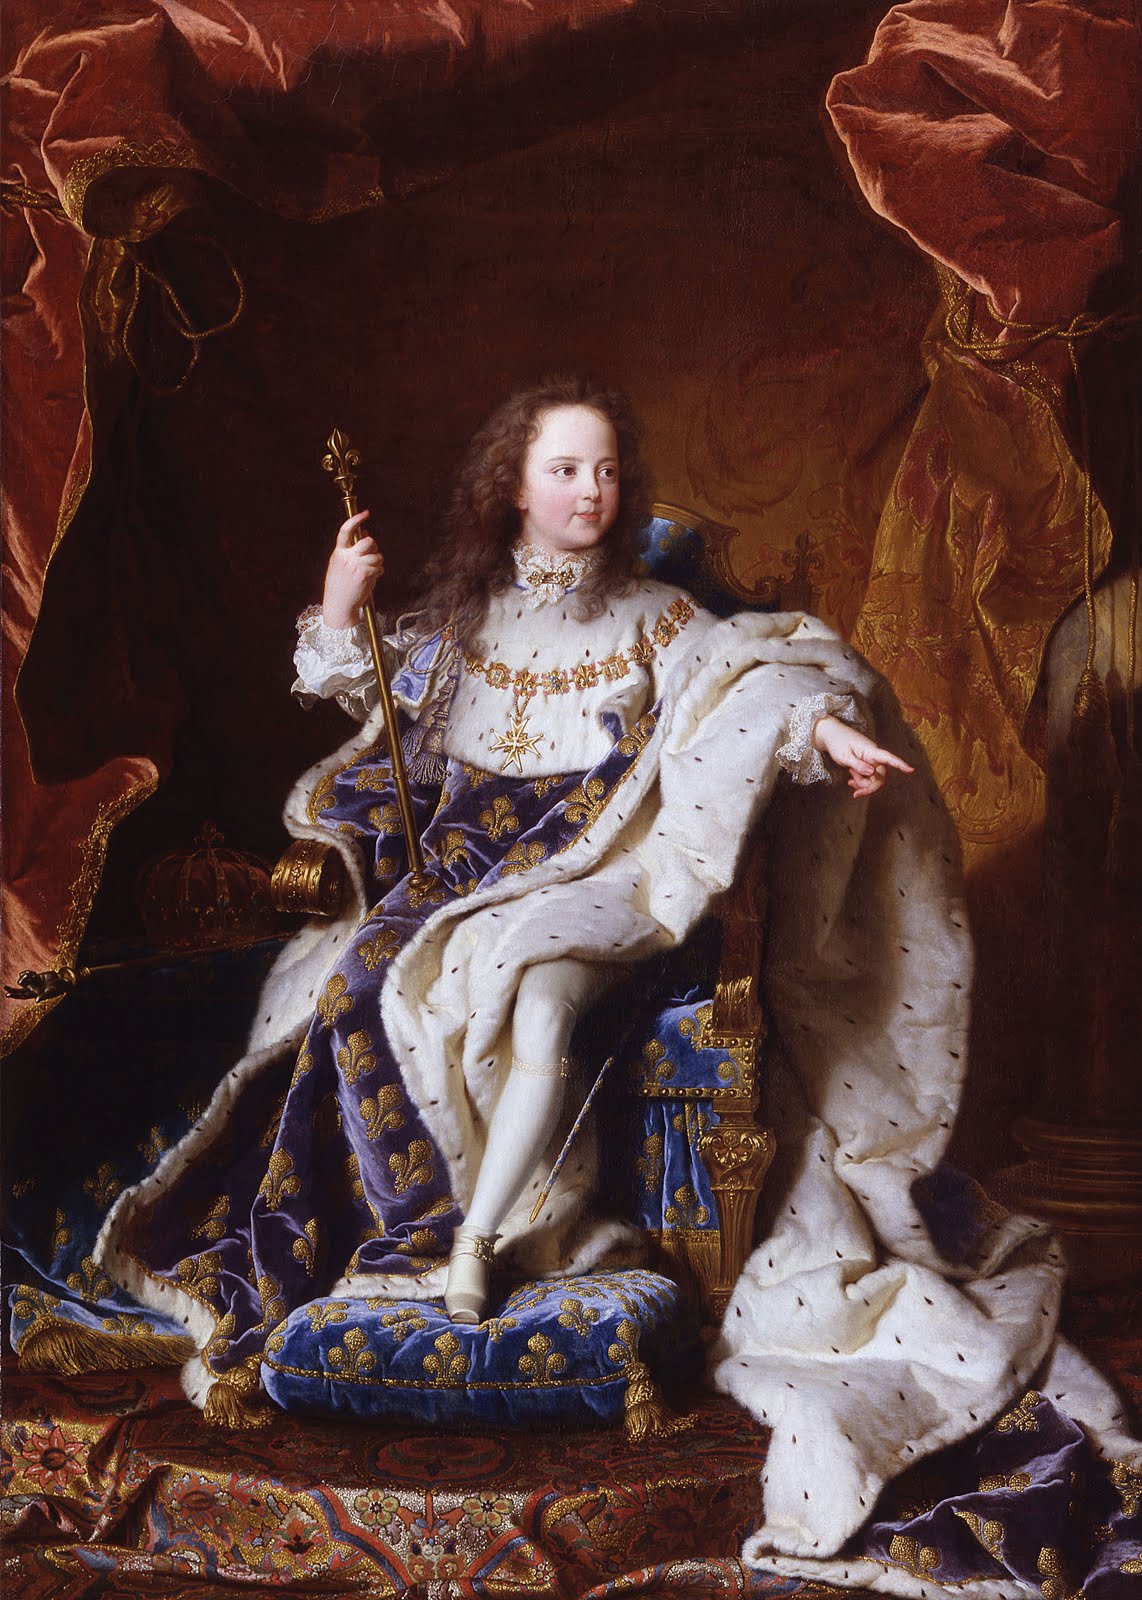 Hyacinthe Rigaud  (French, Perpignan 1659–1743 Paris) and Workshop, ca. 1716–24 Louis XV enfant, oil on canvas, Purchase, Mary Wetmore Shively Bequest, in memory of her husband, Henry L. Shively, M.D., 1960, courtesy The Metropolitan Museum of Art